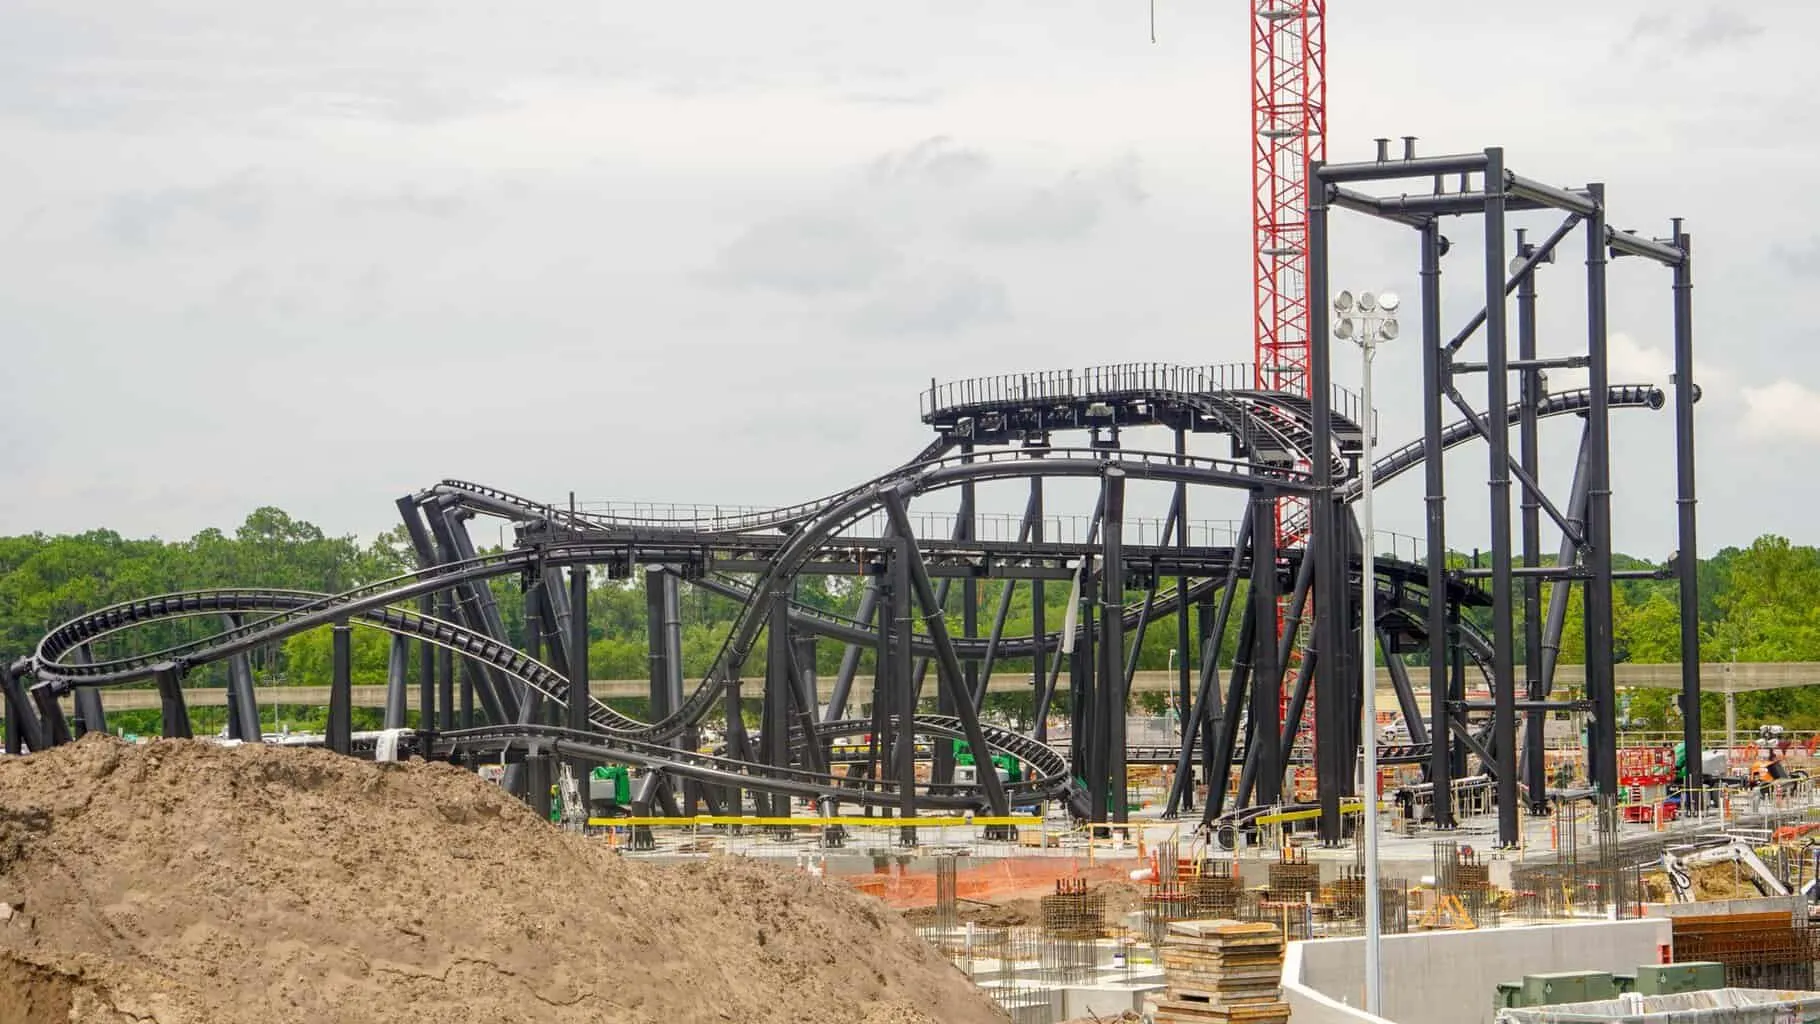 TRON Roller Coaster Construction Update Track almost finished